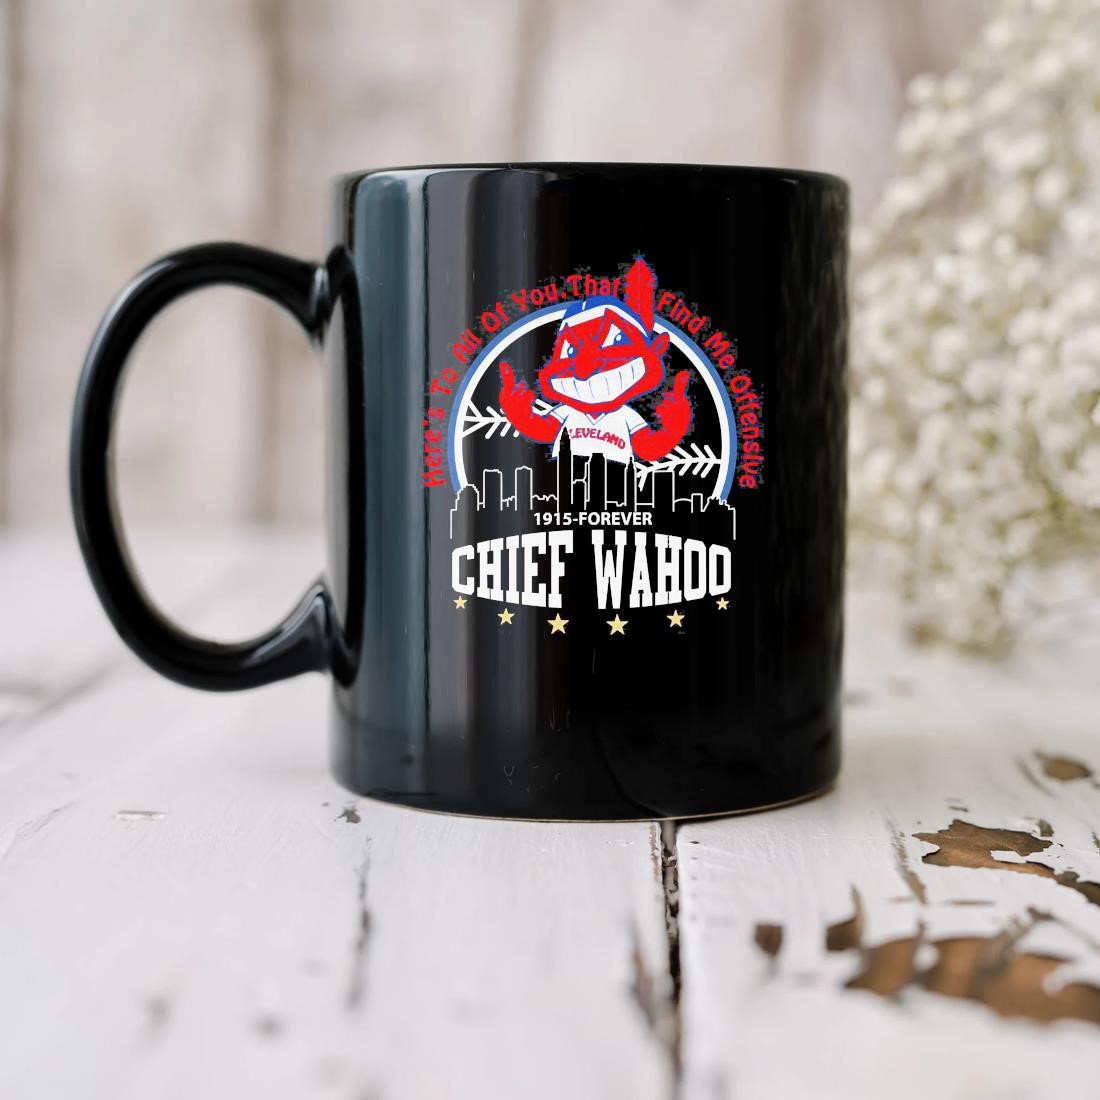 Here's To All Of You That Find Me Offensive 1915 Forever Chief Wahoo Mug